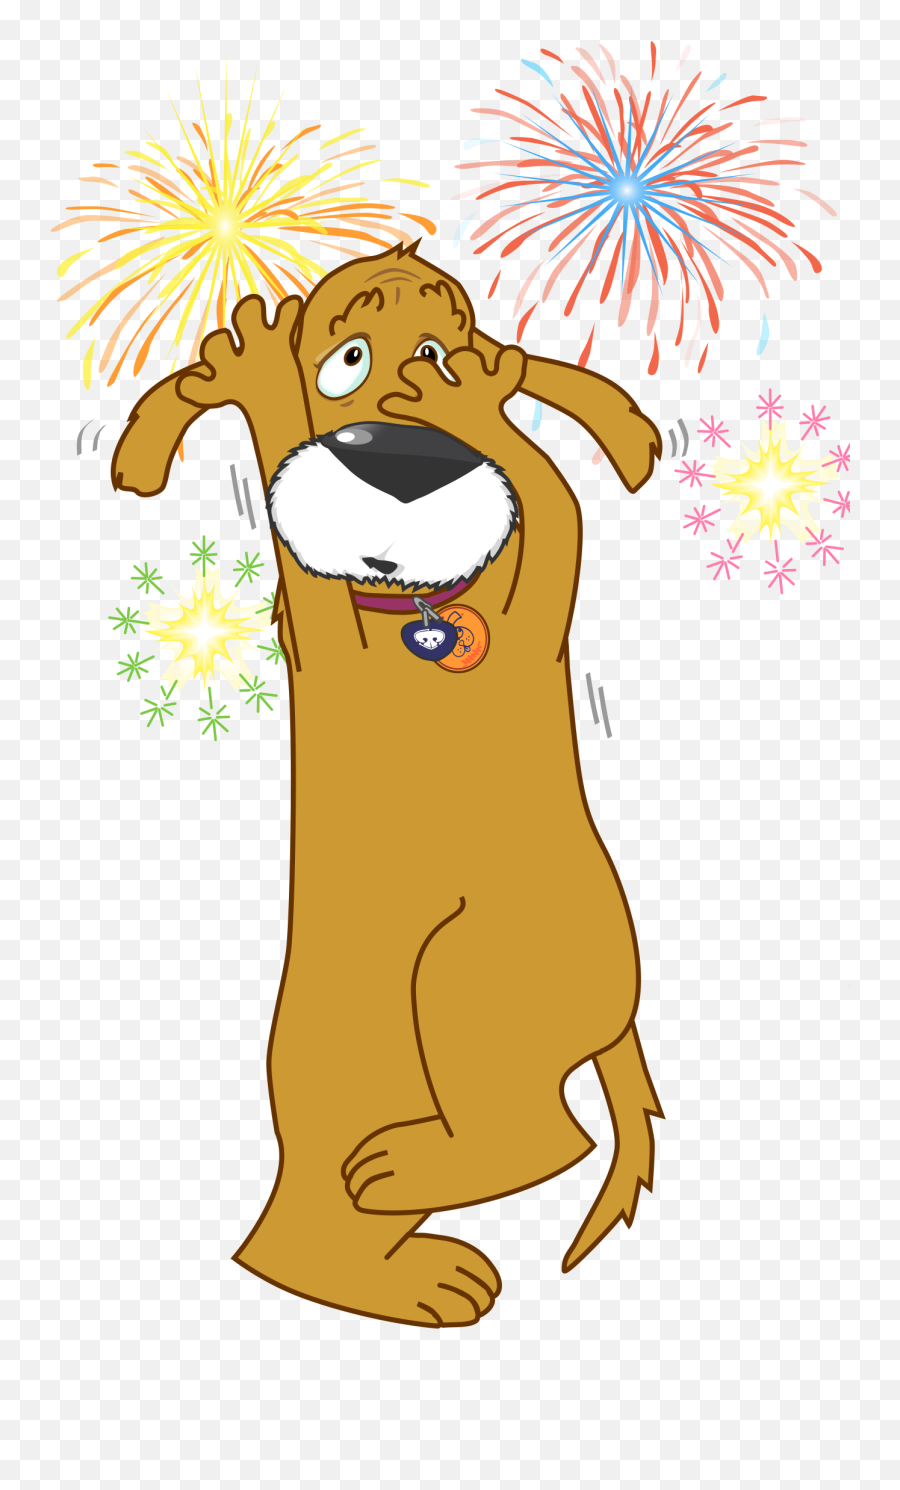 Download Riley Fireworks - Don T Fire Crackers Png Image Fireworks Scared Pets Clipart,Firecrackers Png